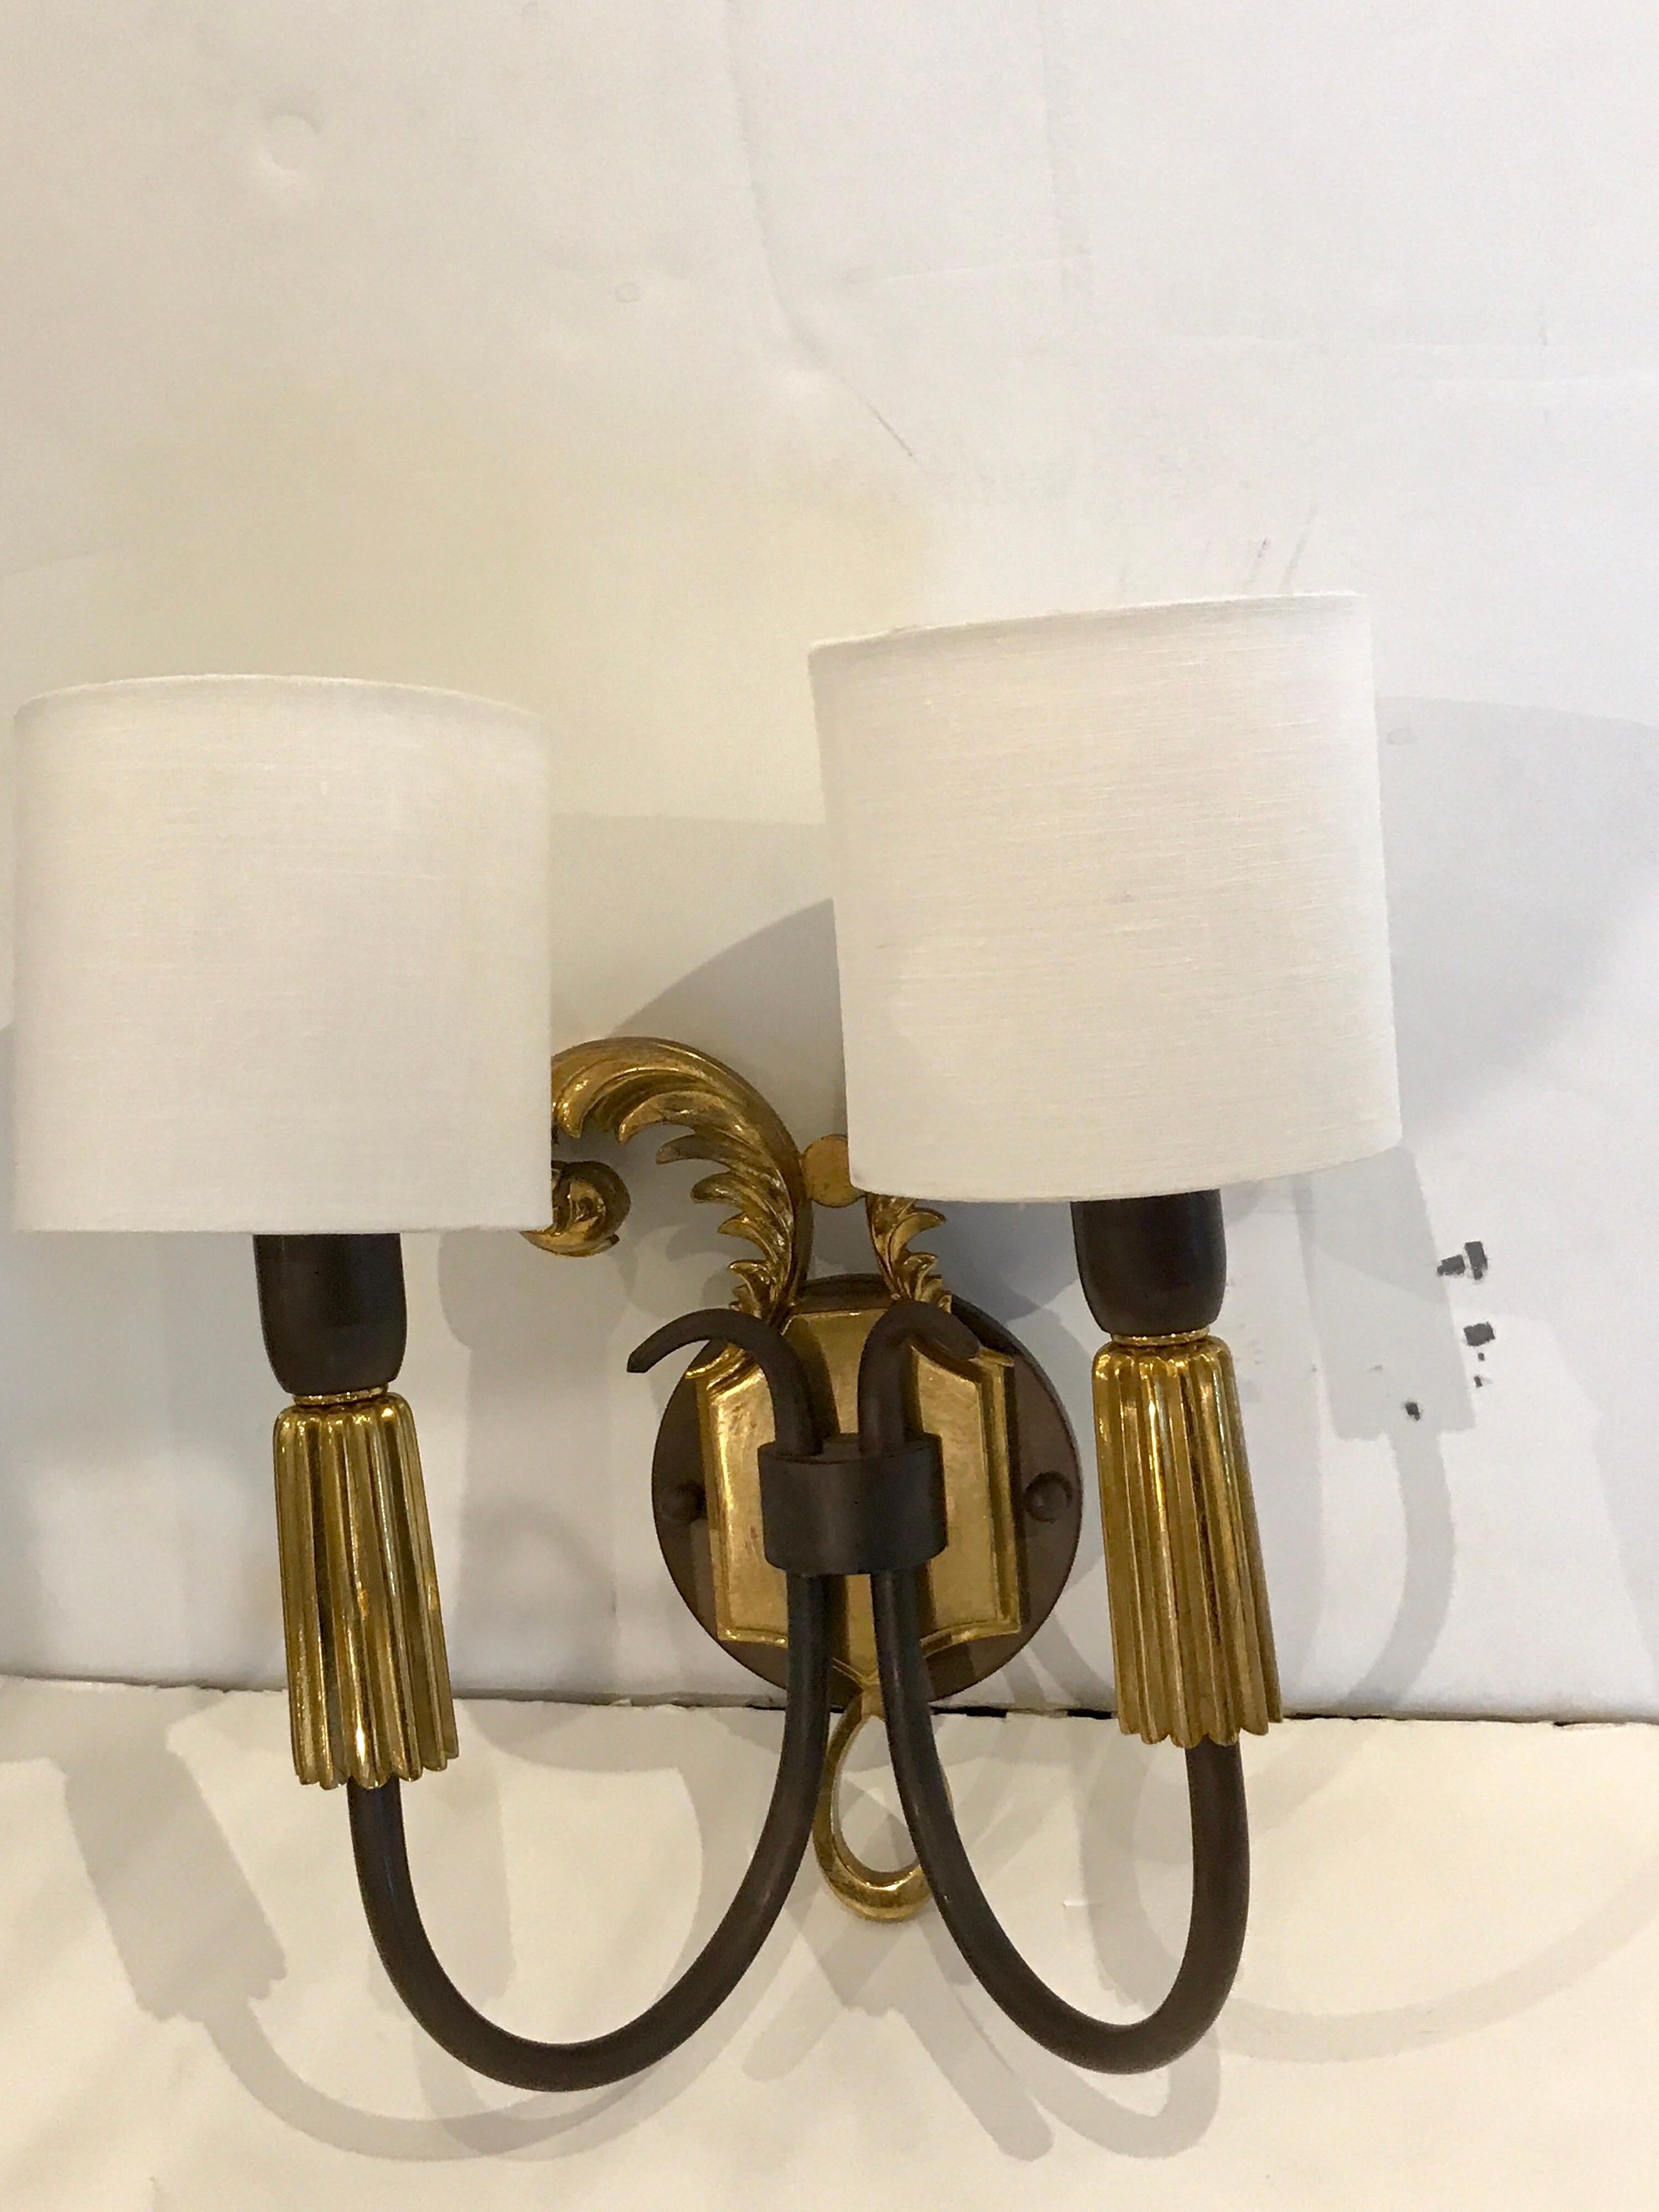 A pair of French Art Deco gilt and patinated bronze wall sconces, each one fitted with two lights. Shades for display purposes only. Newly wired. Backplate measures: 10